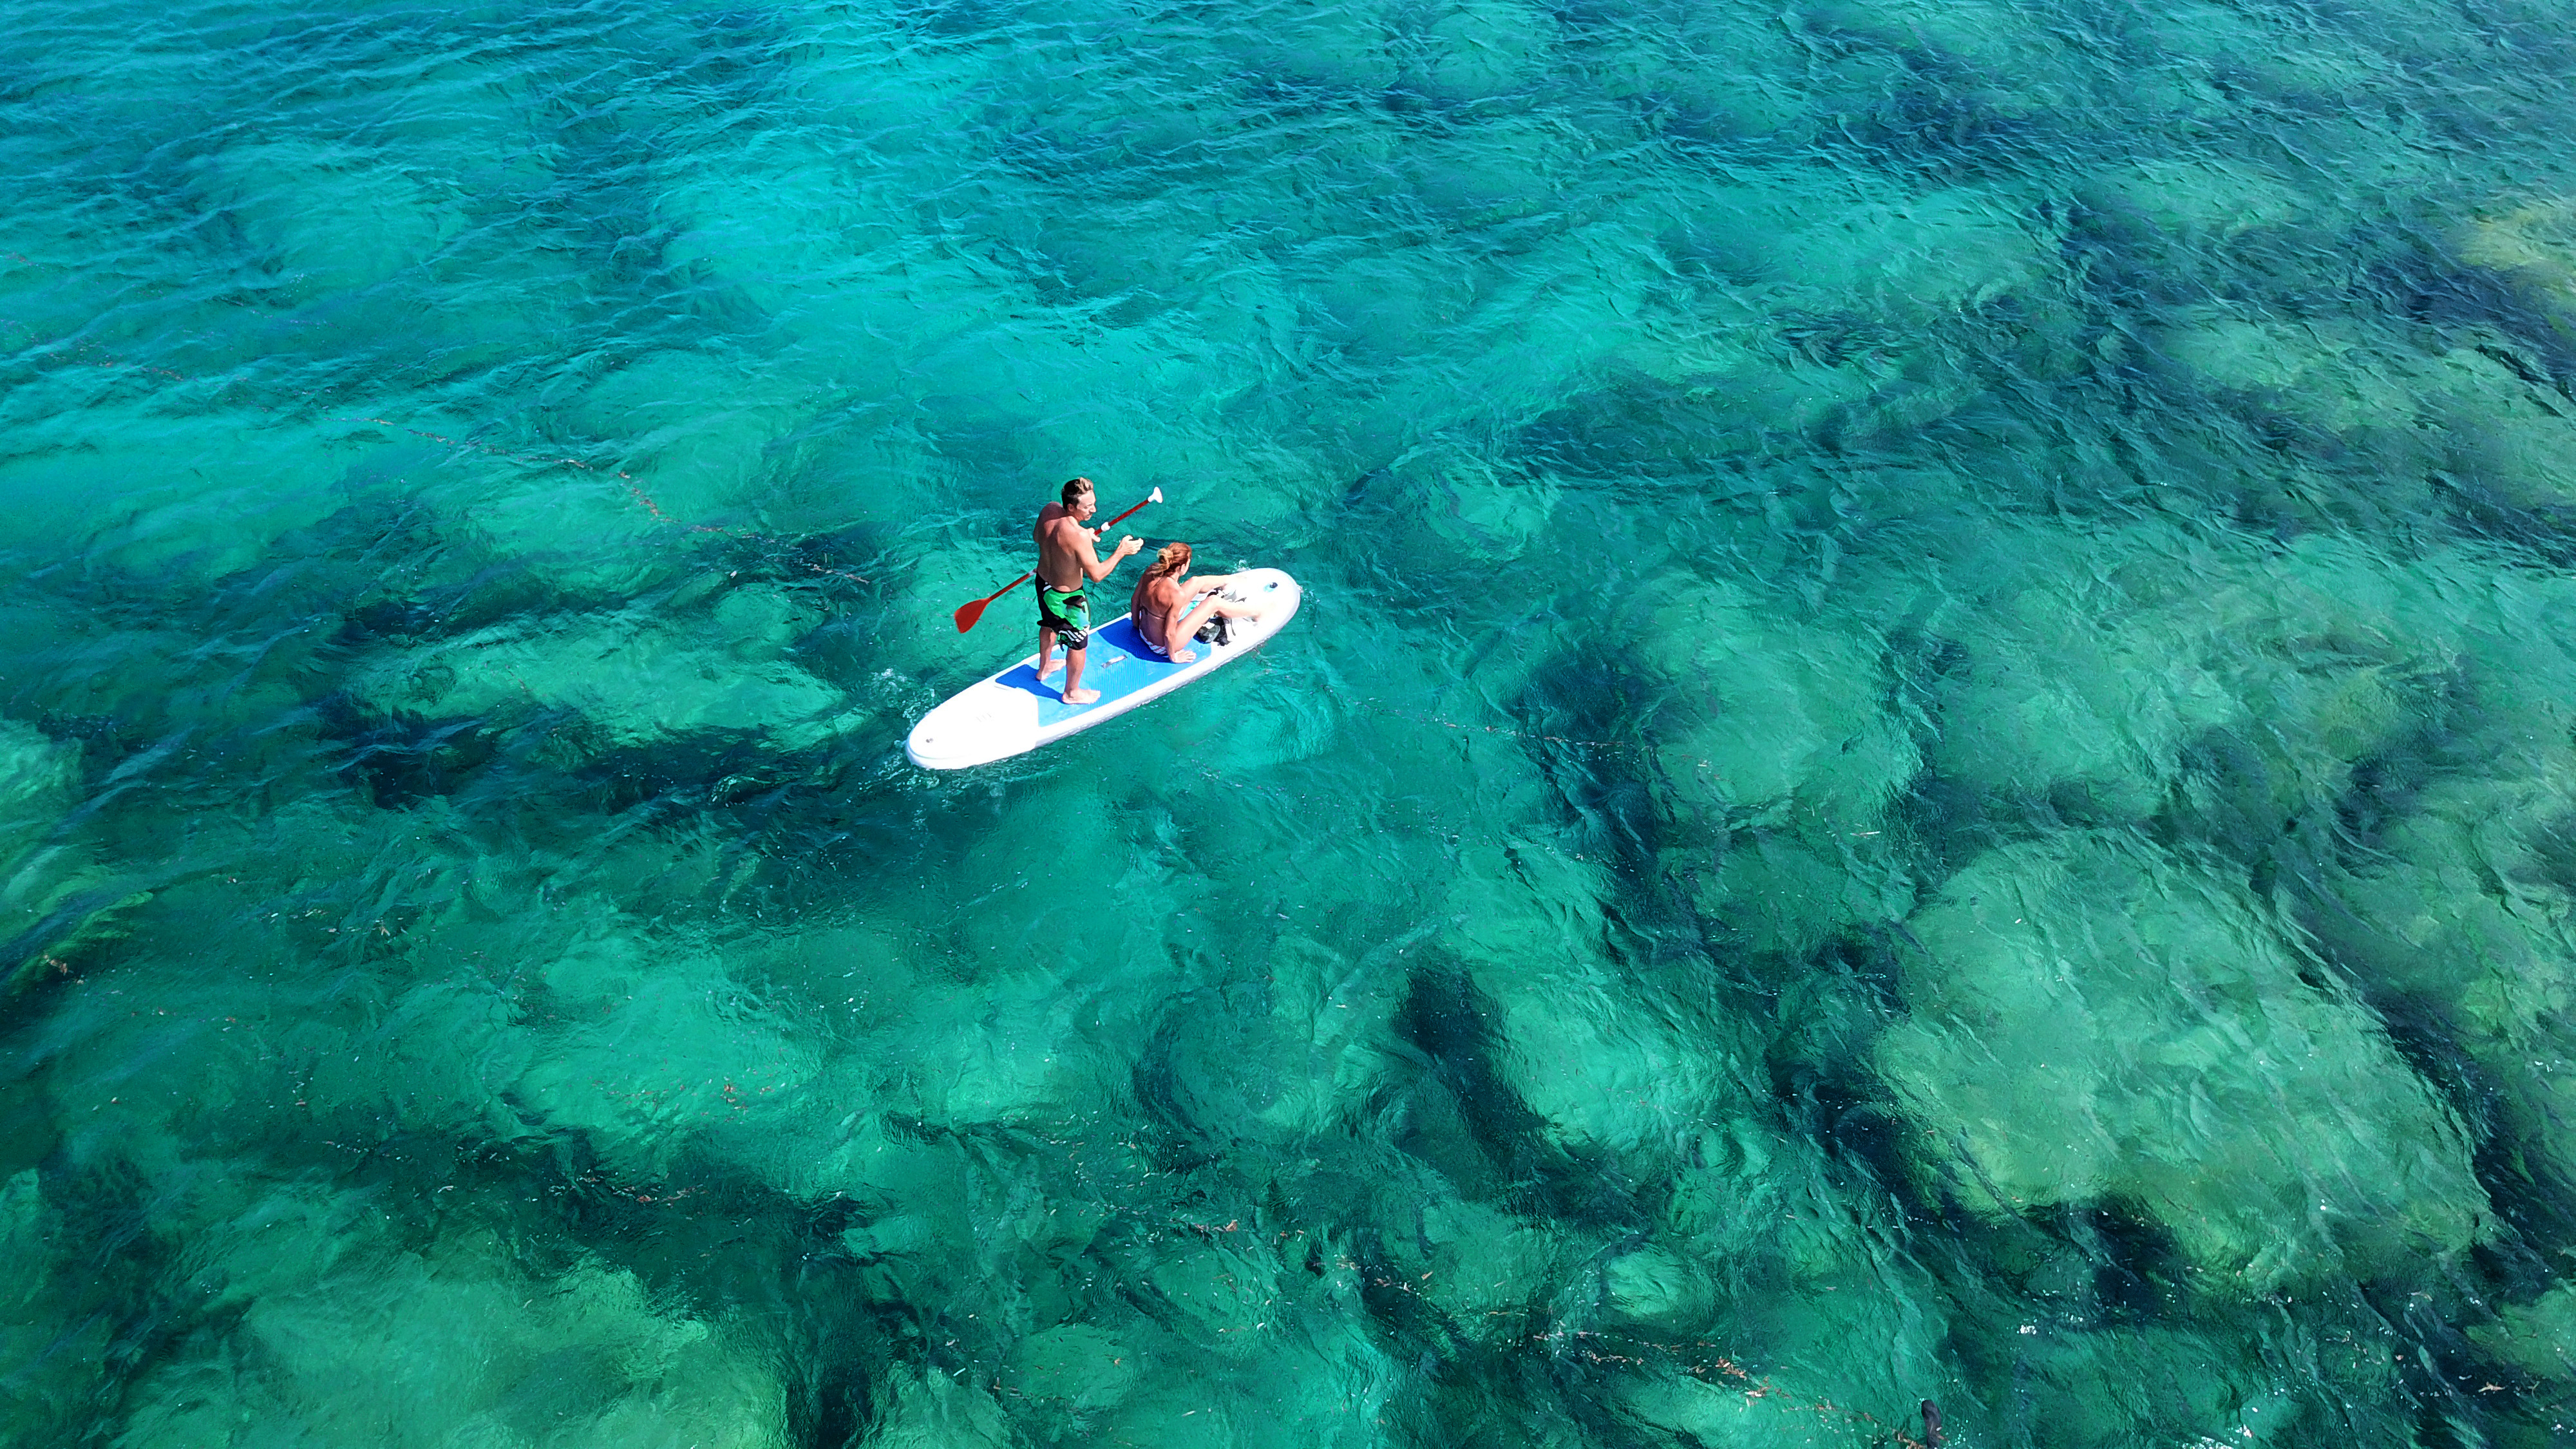 About The Mallorca SUP Company - Your one stop shop for all things stand up paddle in Mallorca